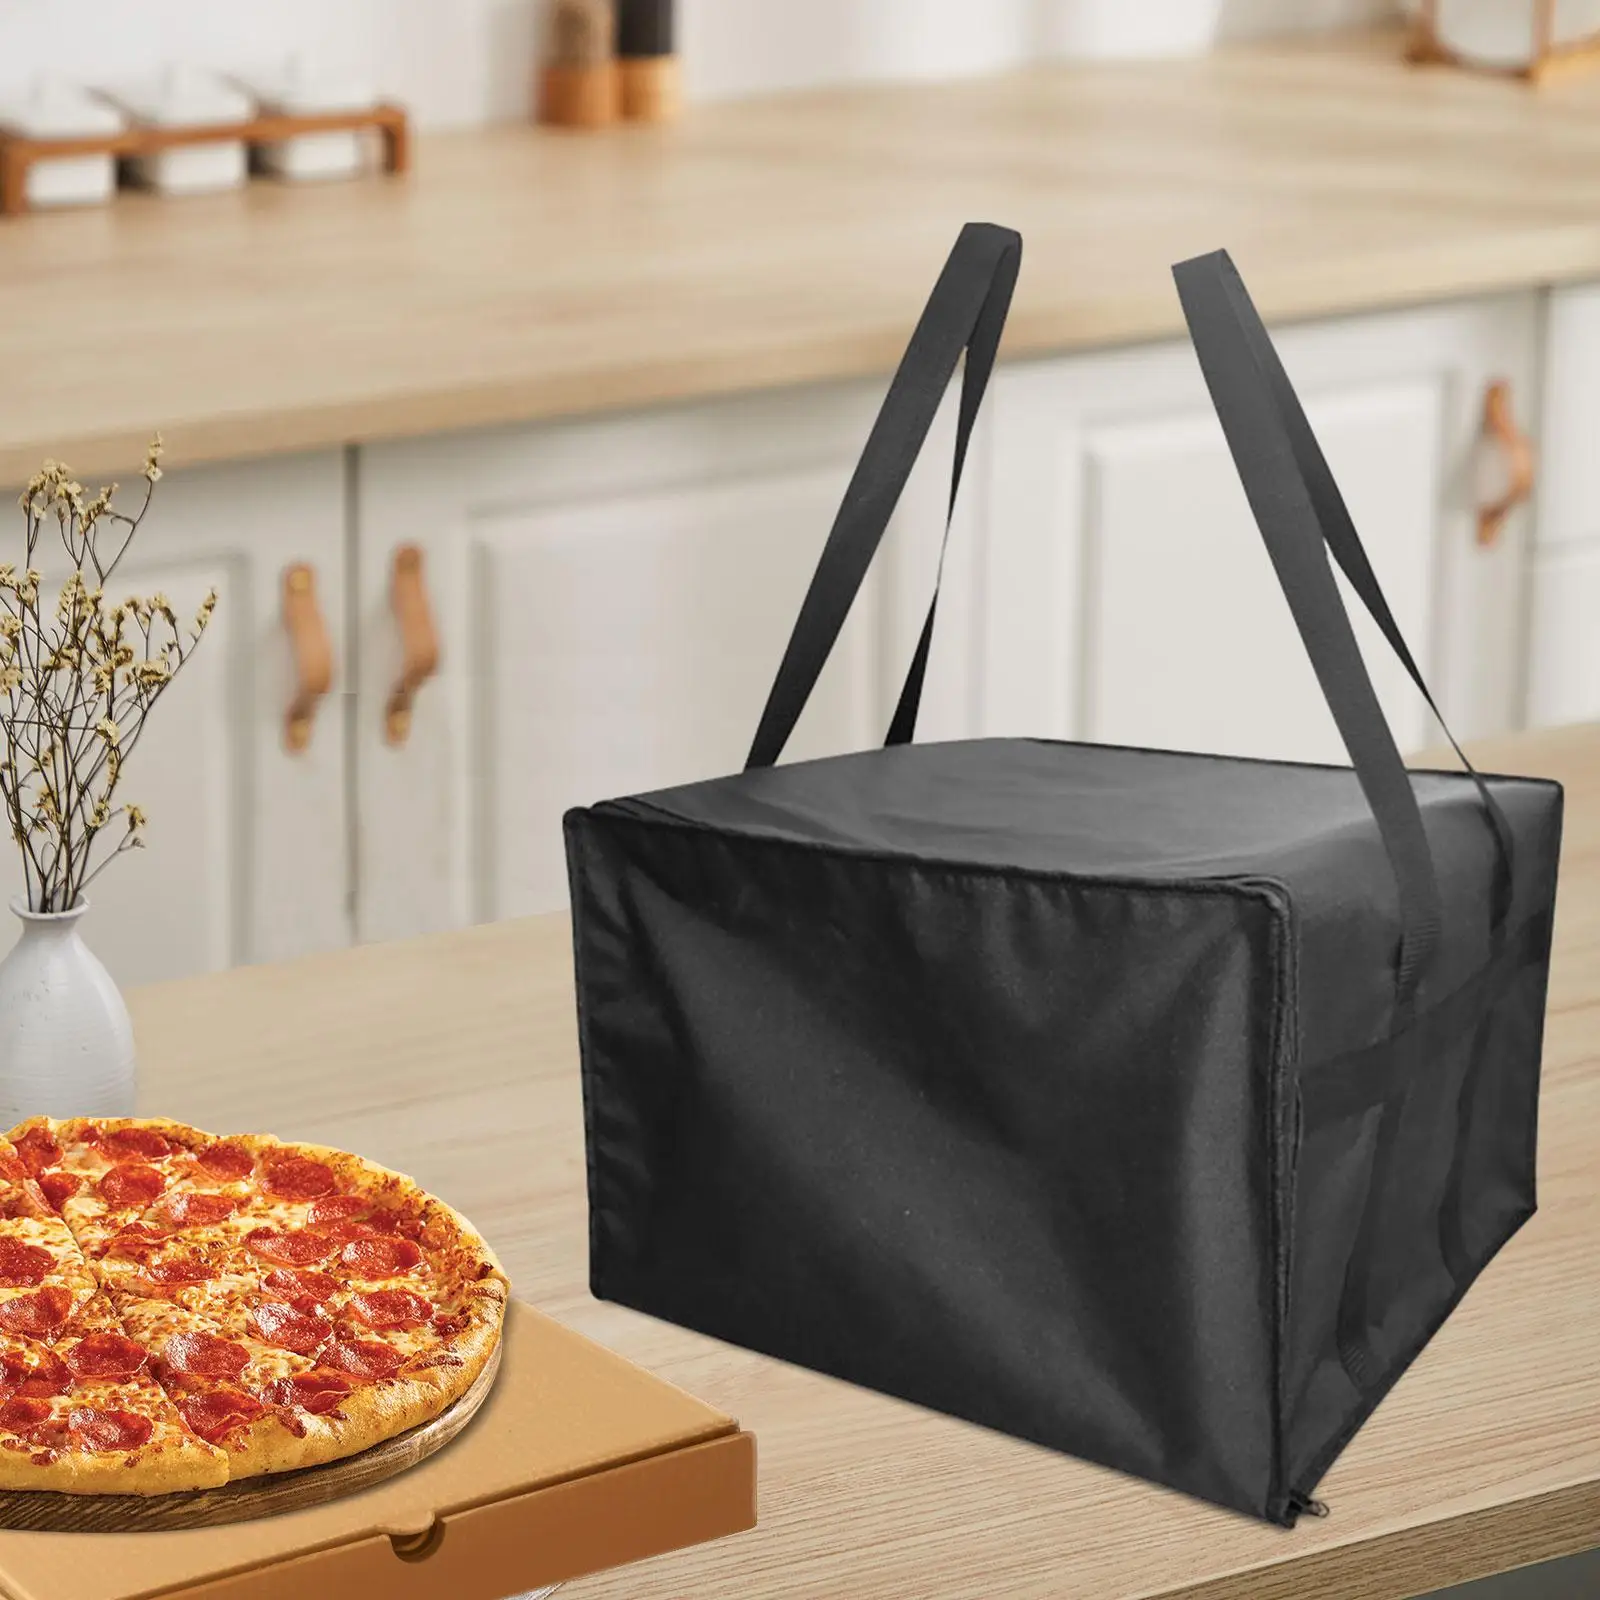 Pizza Develivey Bag Waterproof Reusable Large Capacity Pizza Warmer Carrying Case for Catering Personal Shopping Outdoor Camping